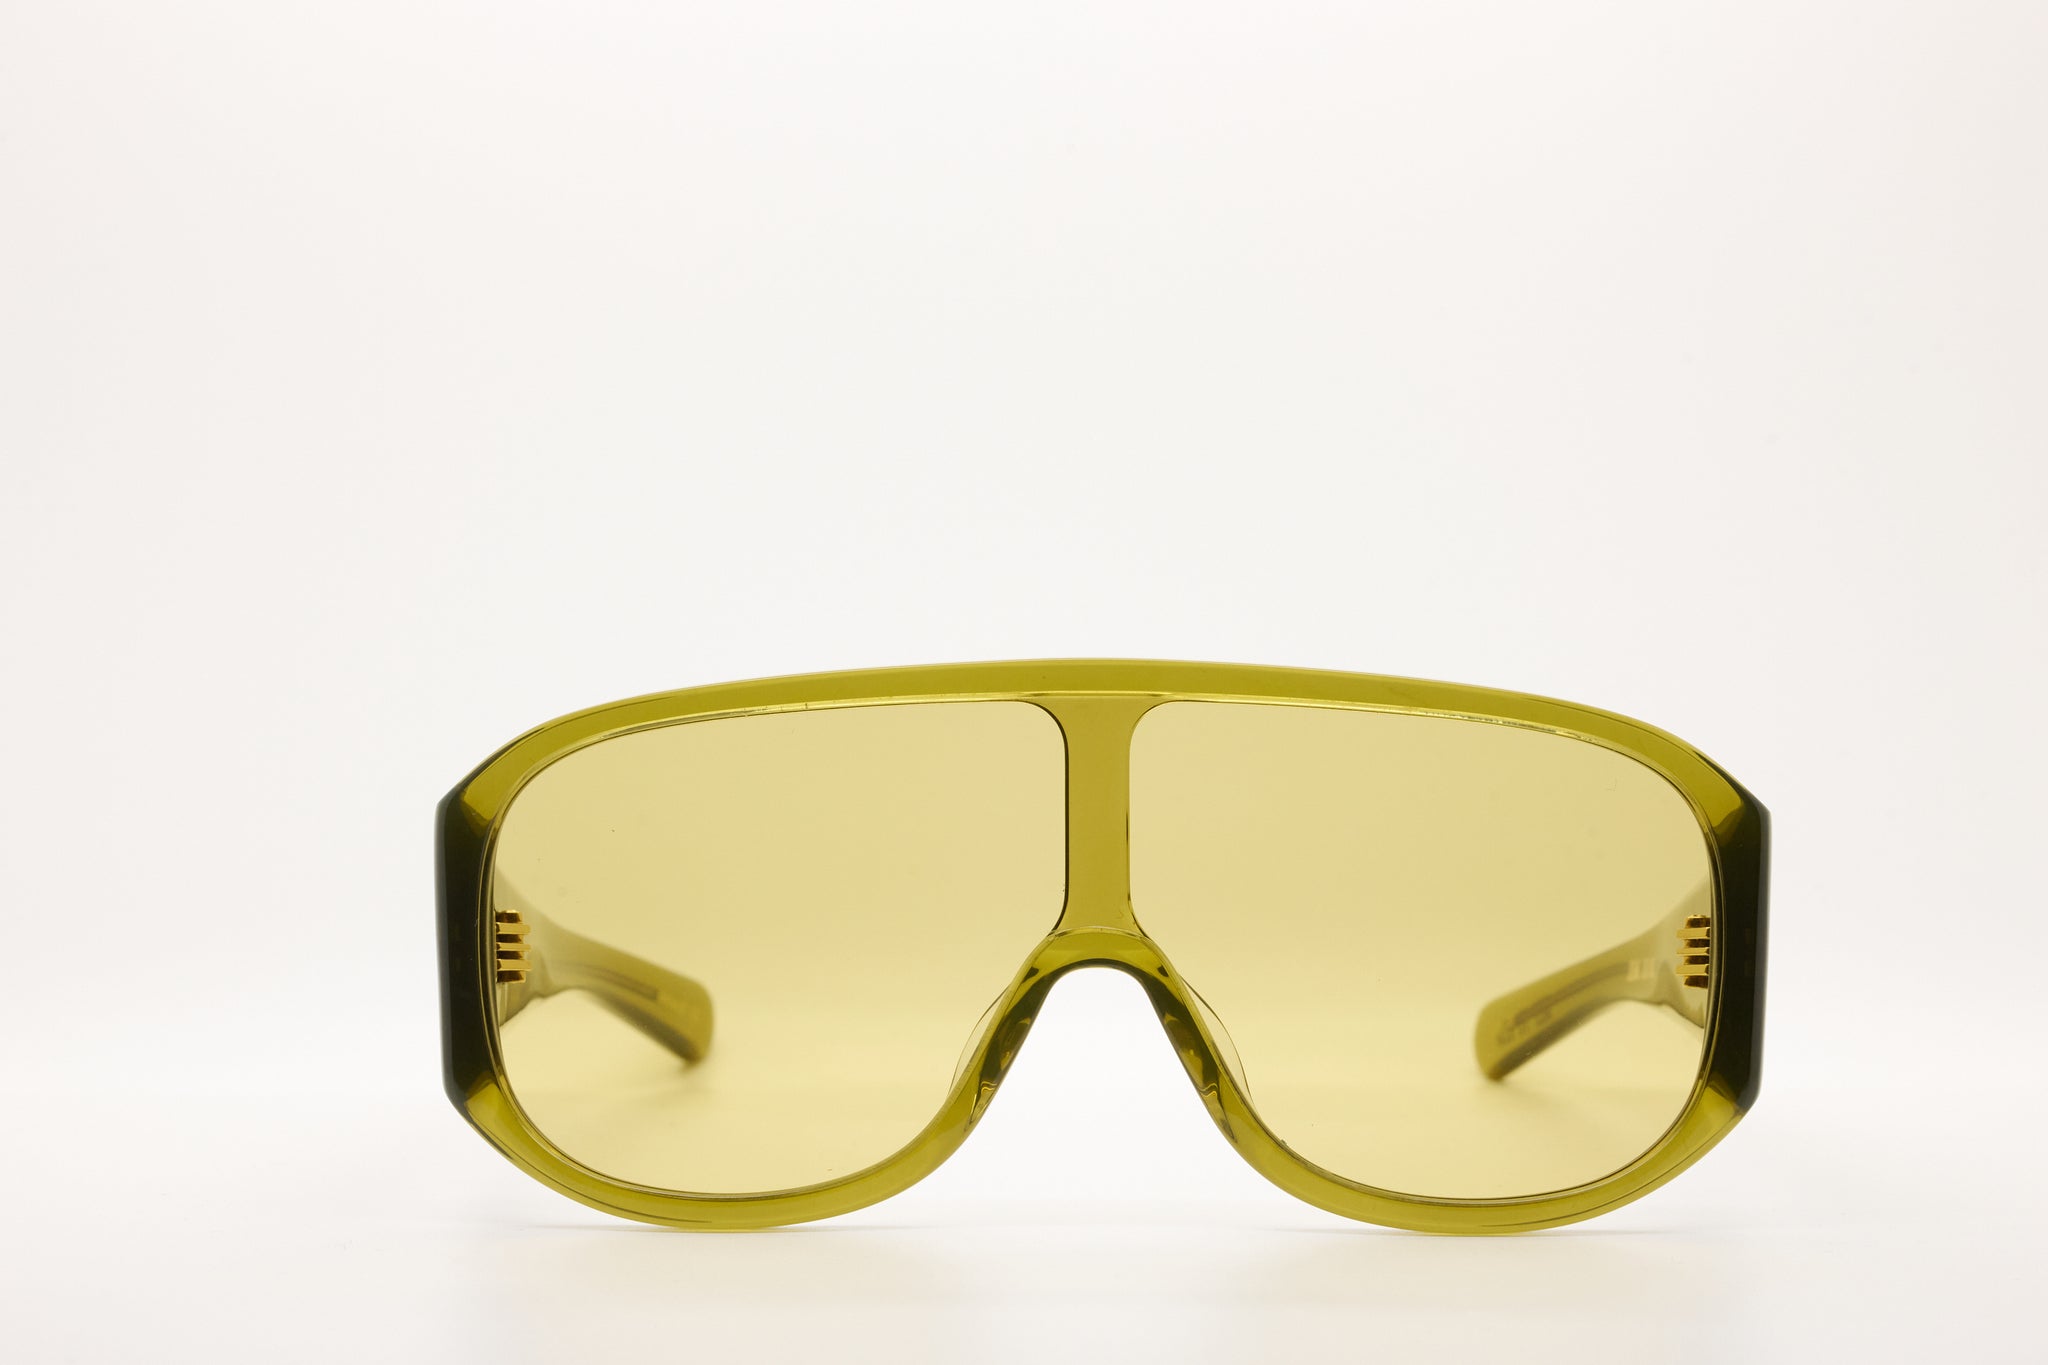 Crystal Olive / Smoked Olive Lens